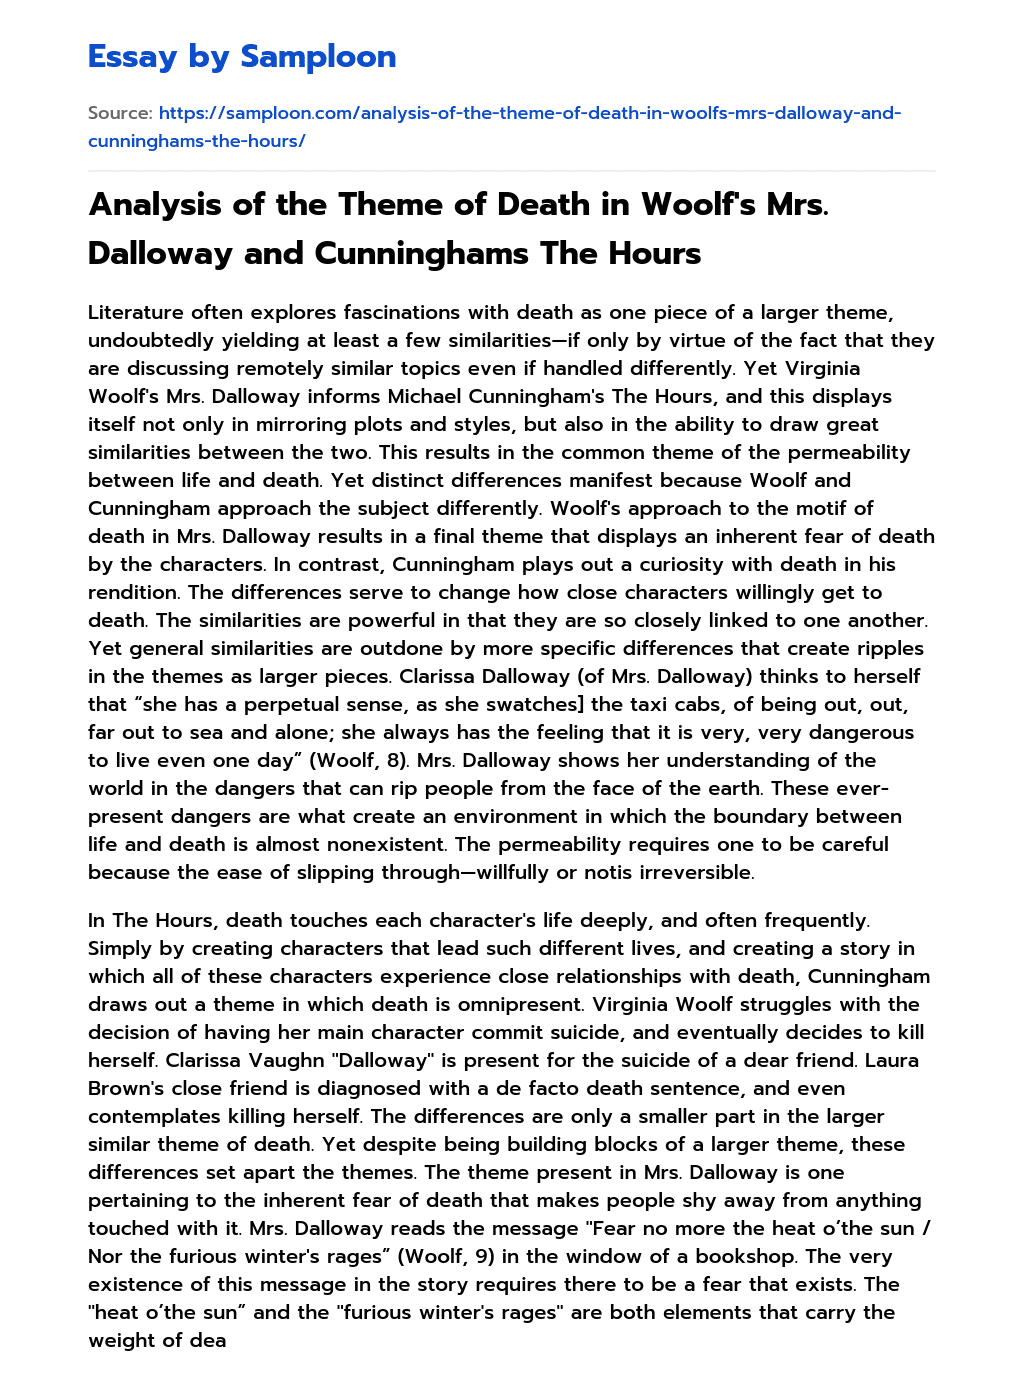 Analysis of the Theme of Death in Woolf’s Mrs. Dalloway and Cunninghams The Hours essay